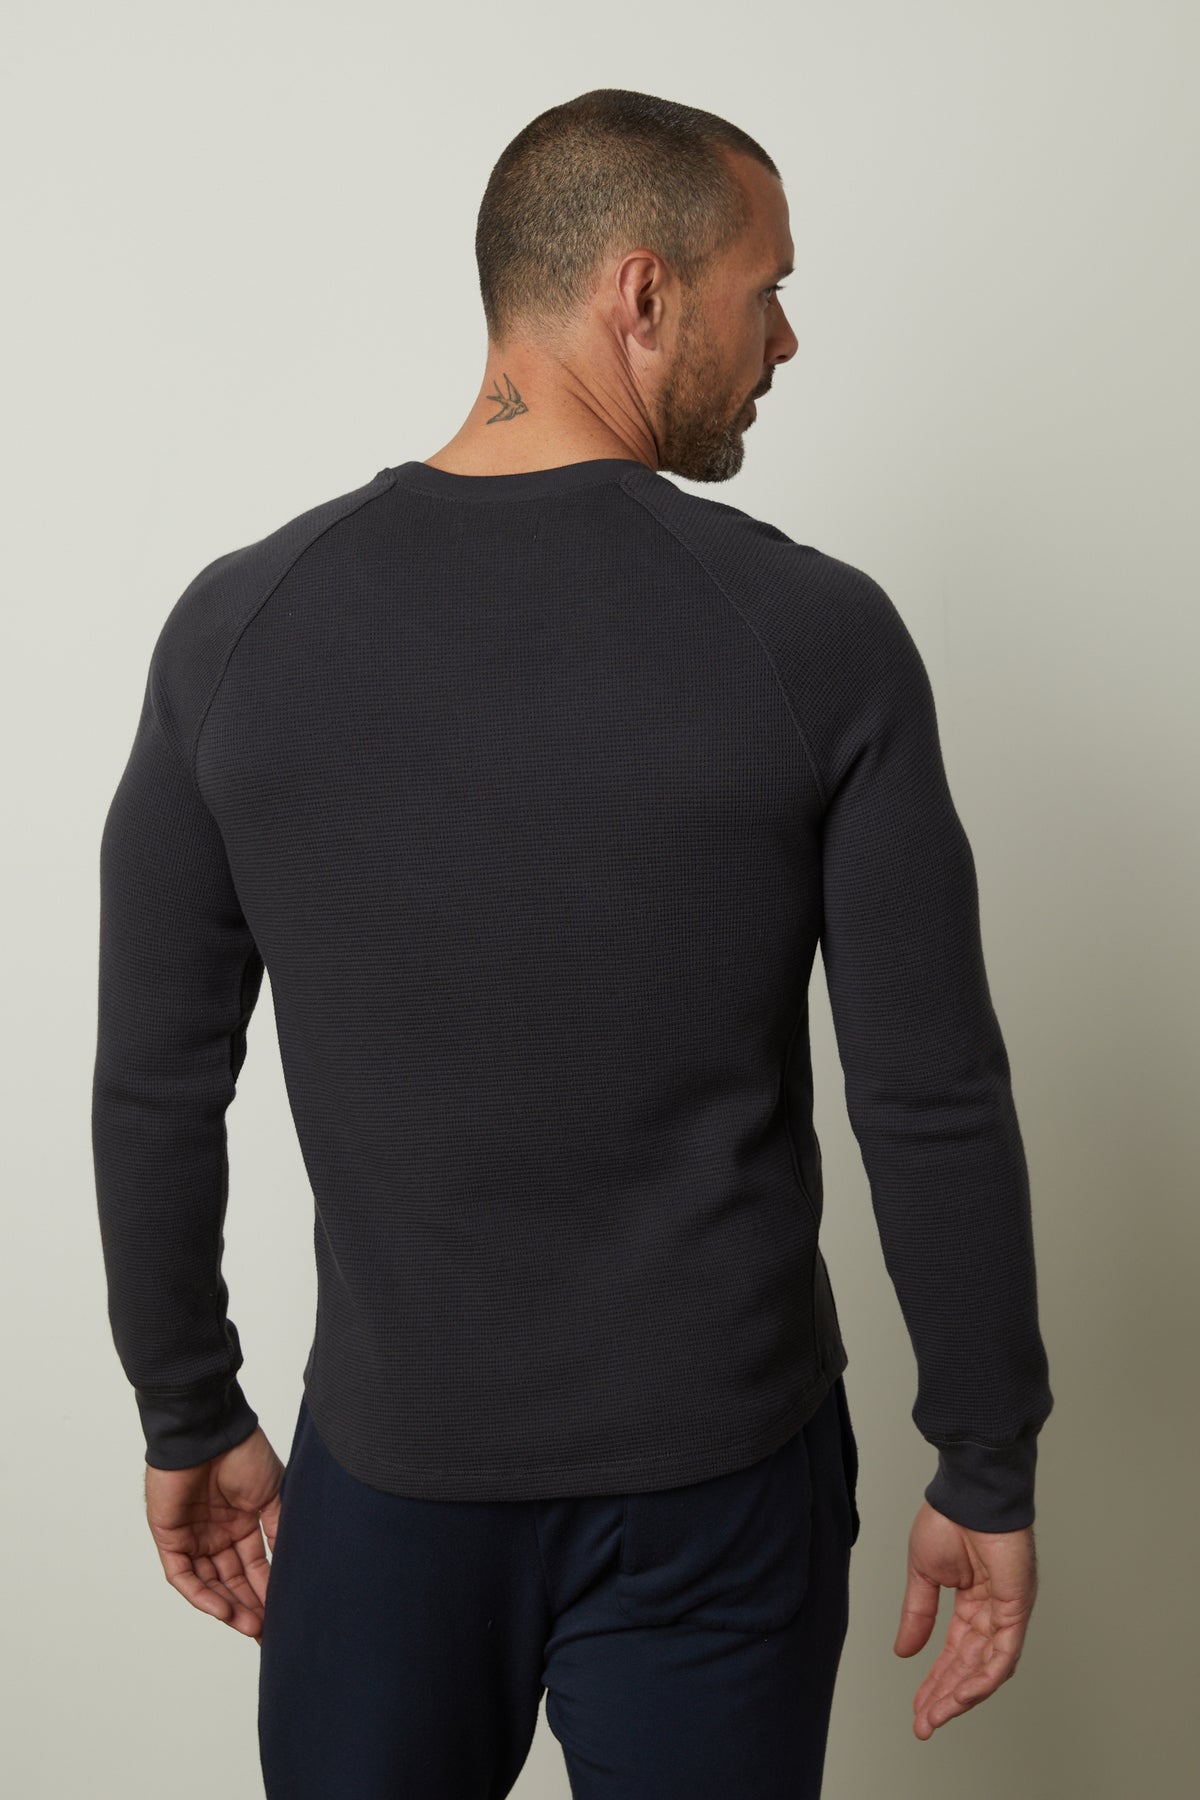 The man wearing a grey sweatshirt has a comfortable fit with the Velvet by Graham & Spencer GLEN THERMAL CREW.-35231540248769